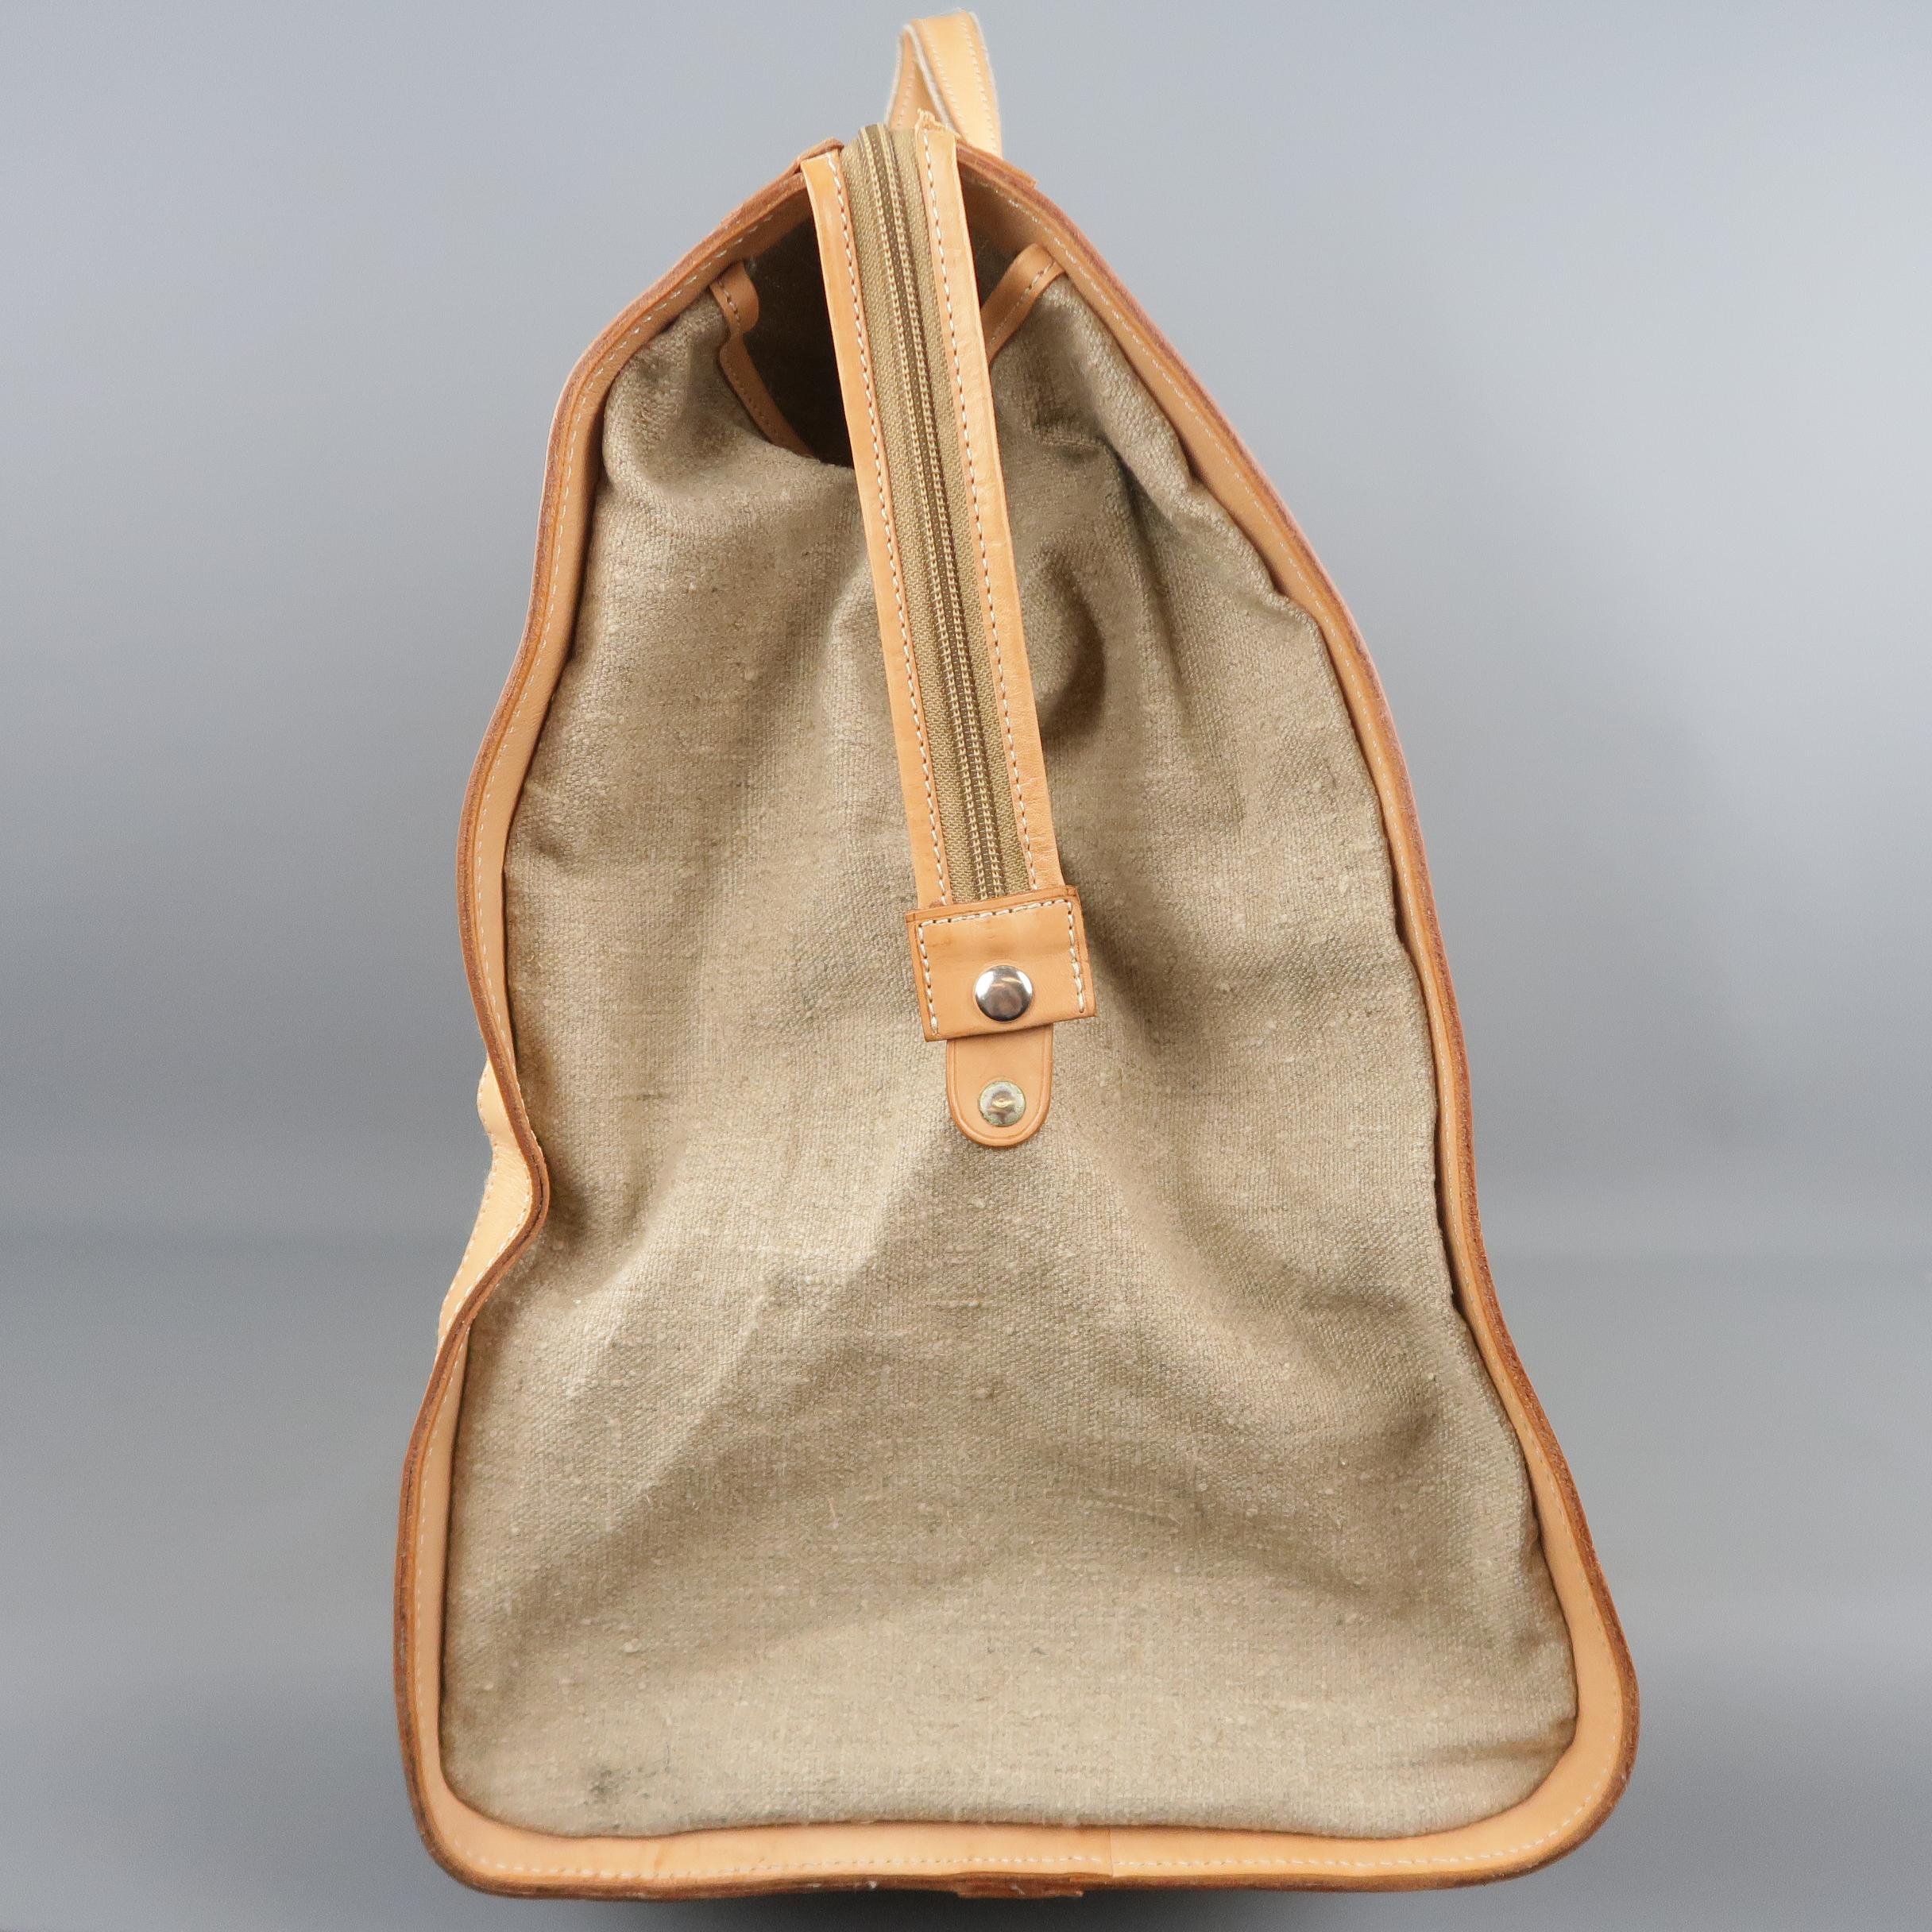 EUROPEAN NATURAL LEATHER BAGS Canvas & Leather Weekender Bag 1